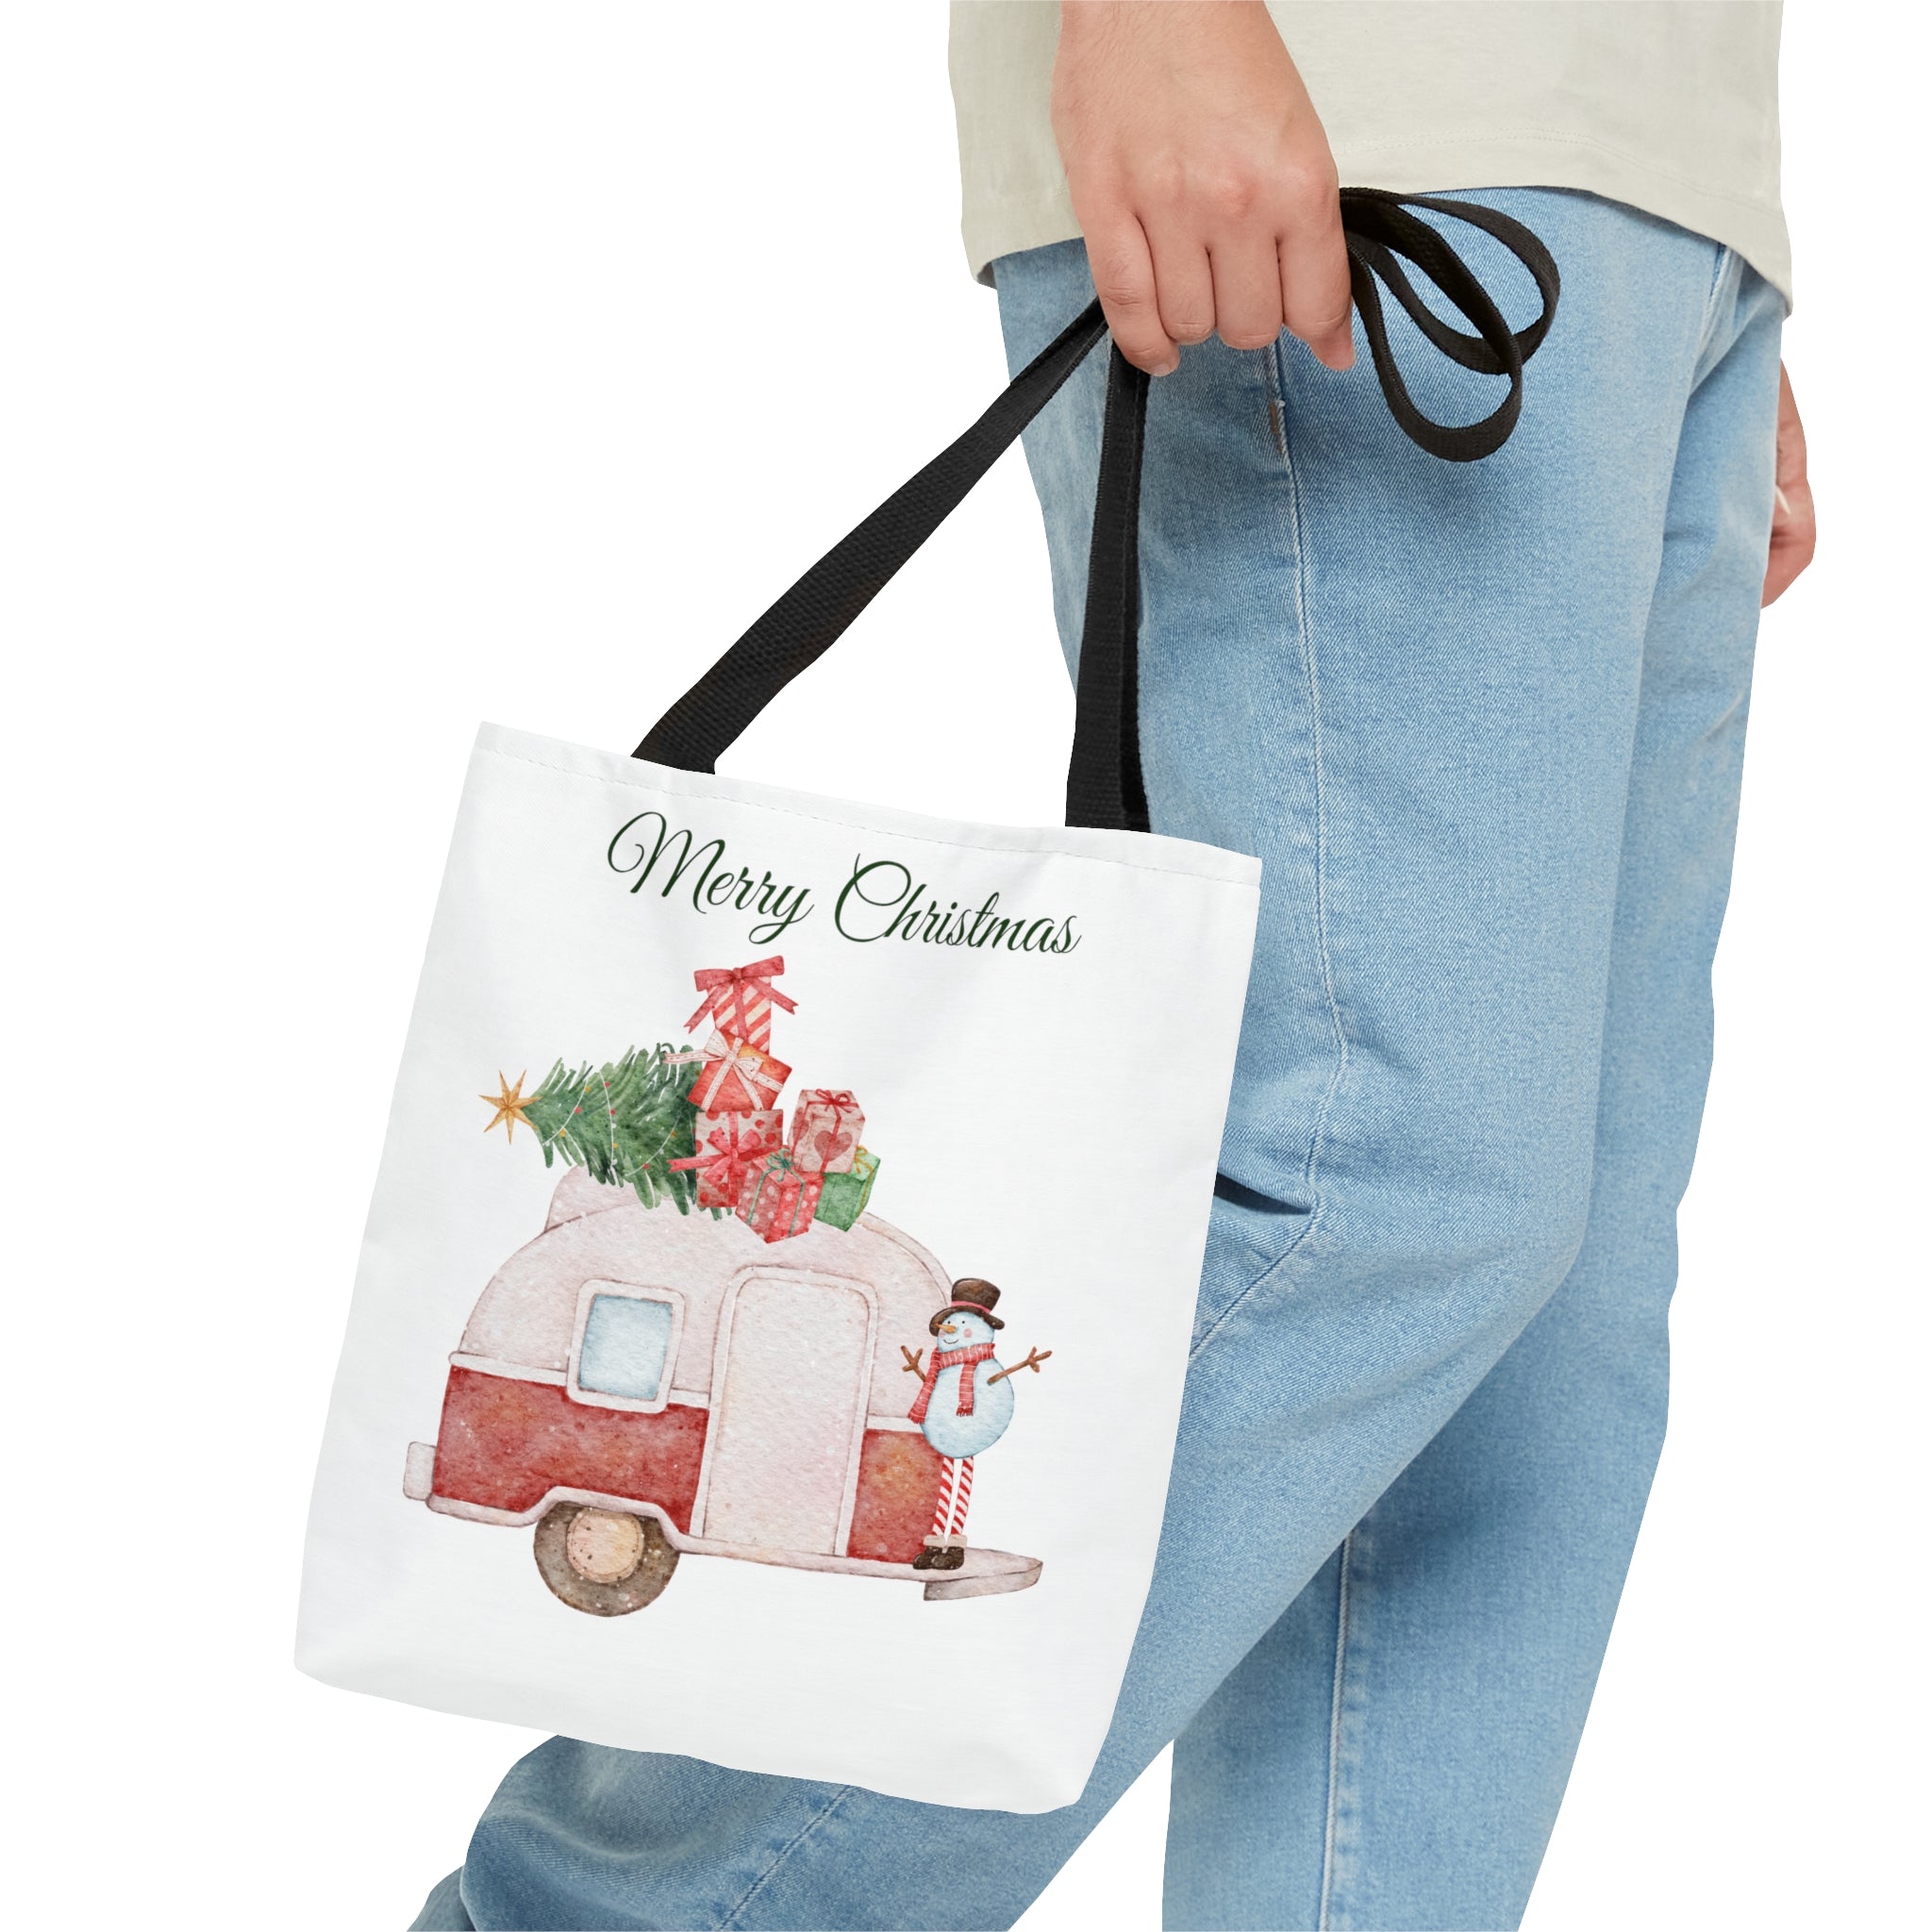 White Merry Christmas Tote Bag, Reusable Canvas Tote Bags, Available in Different Size